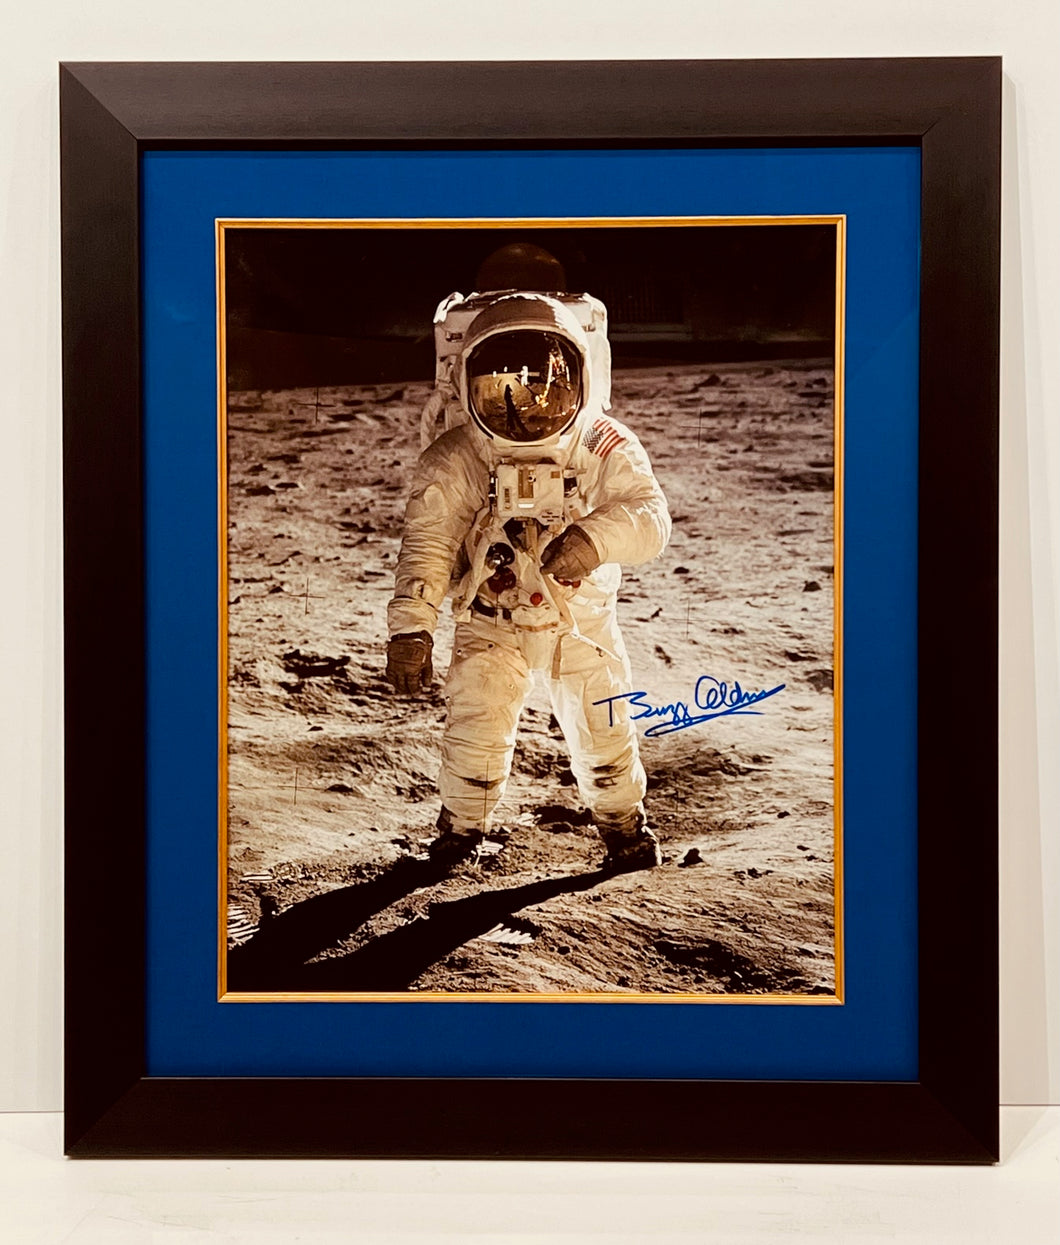 BUZZ ALDRIN HAND-SIGNED SPACE SUIT ON MOON PHOTOGRAPH